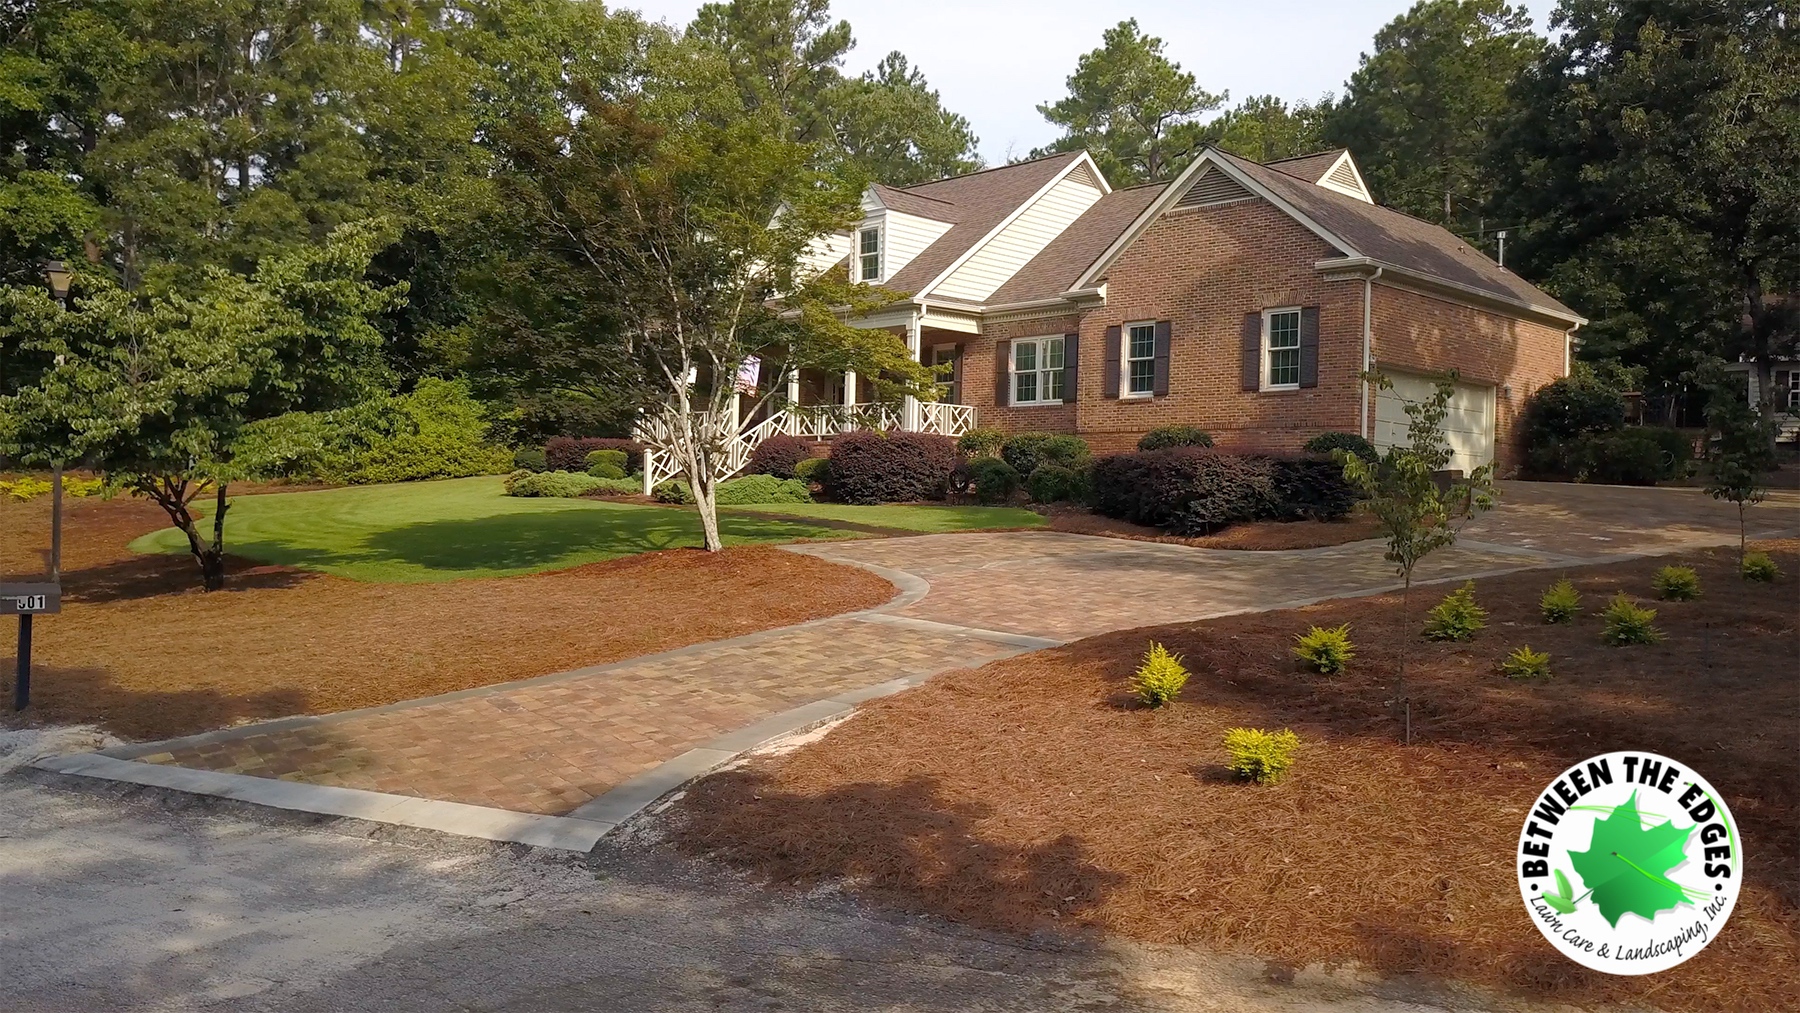 Home Landscaping Lawn Care And, Residential Landscaping Augusta Ga